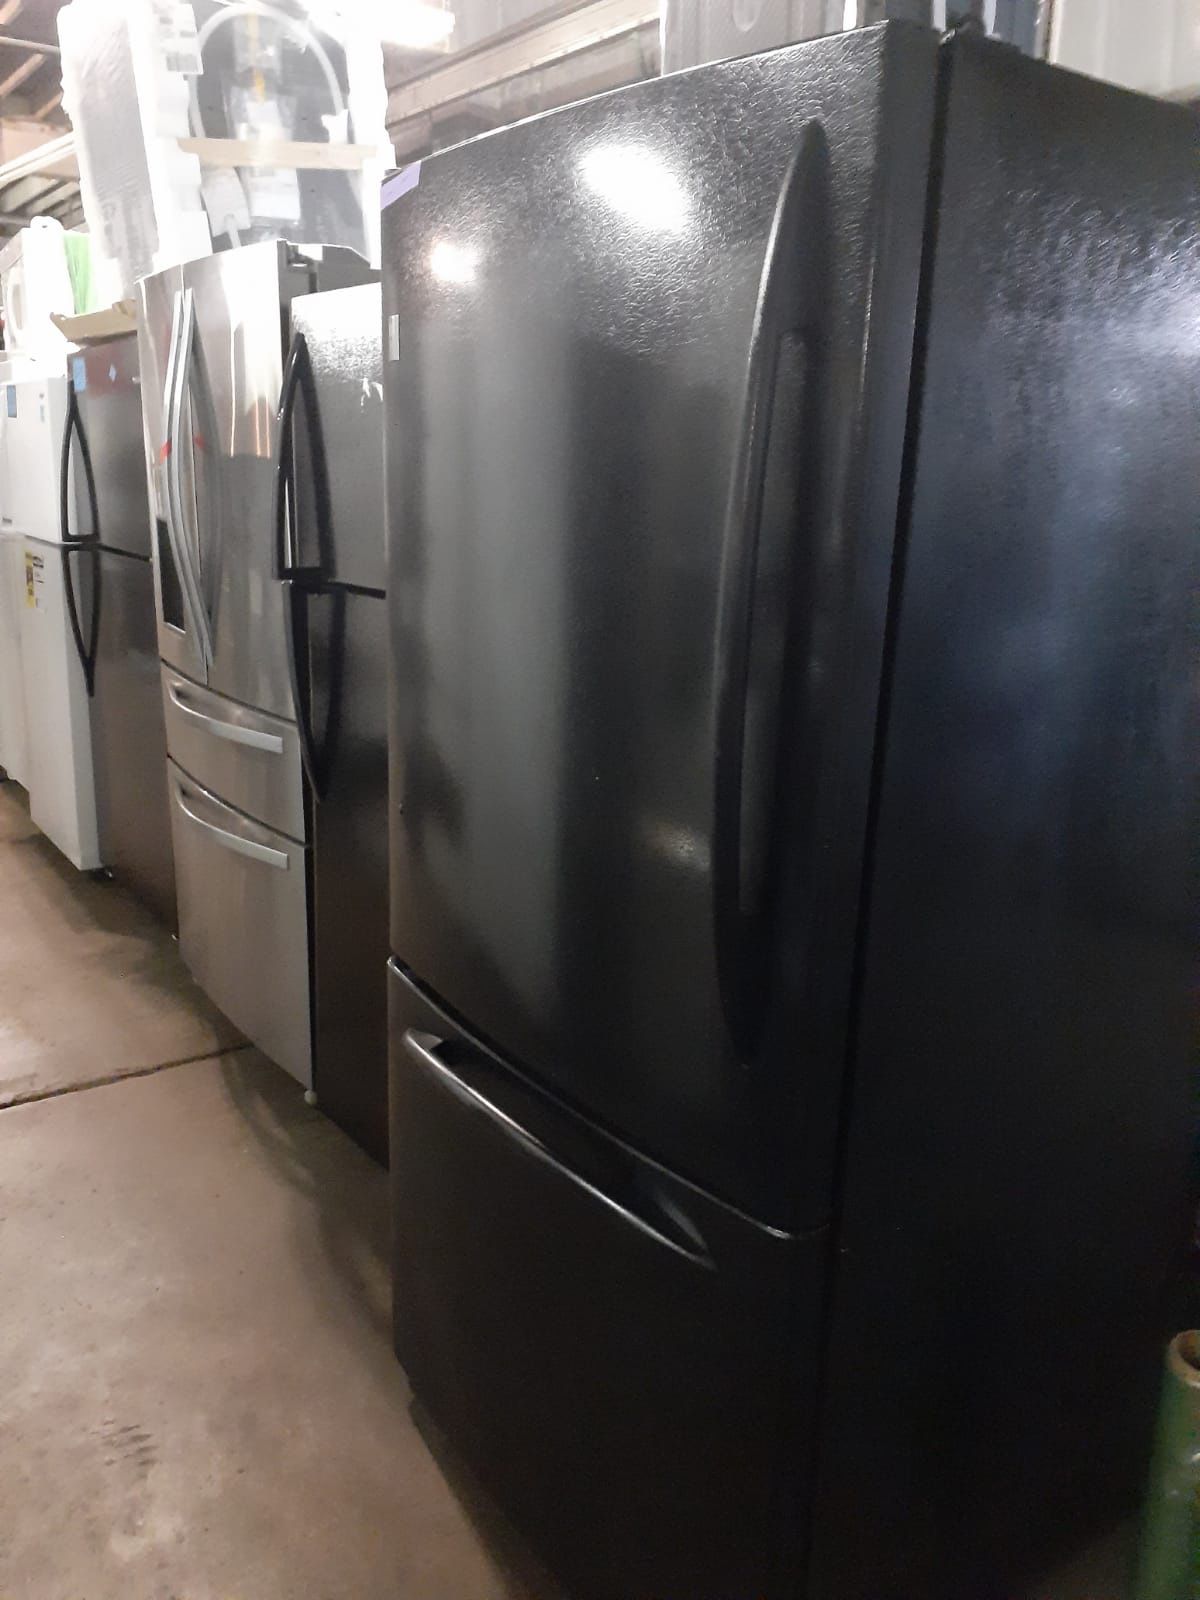 GE bottom freezer refrigerator in excellent conditions with 4 months warranty